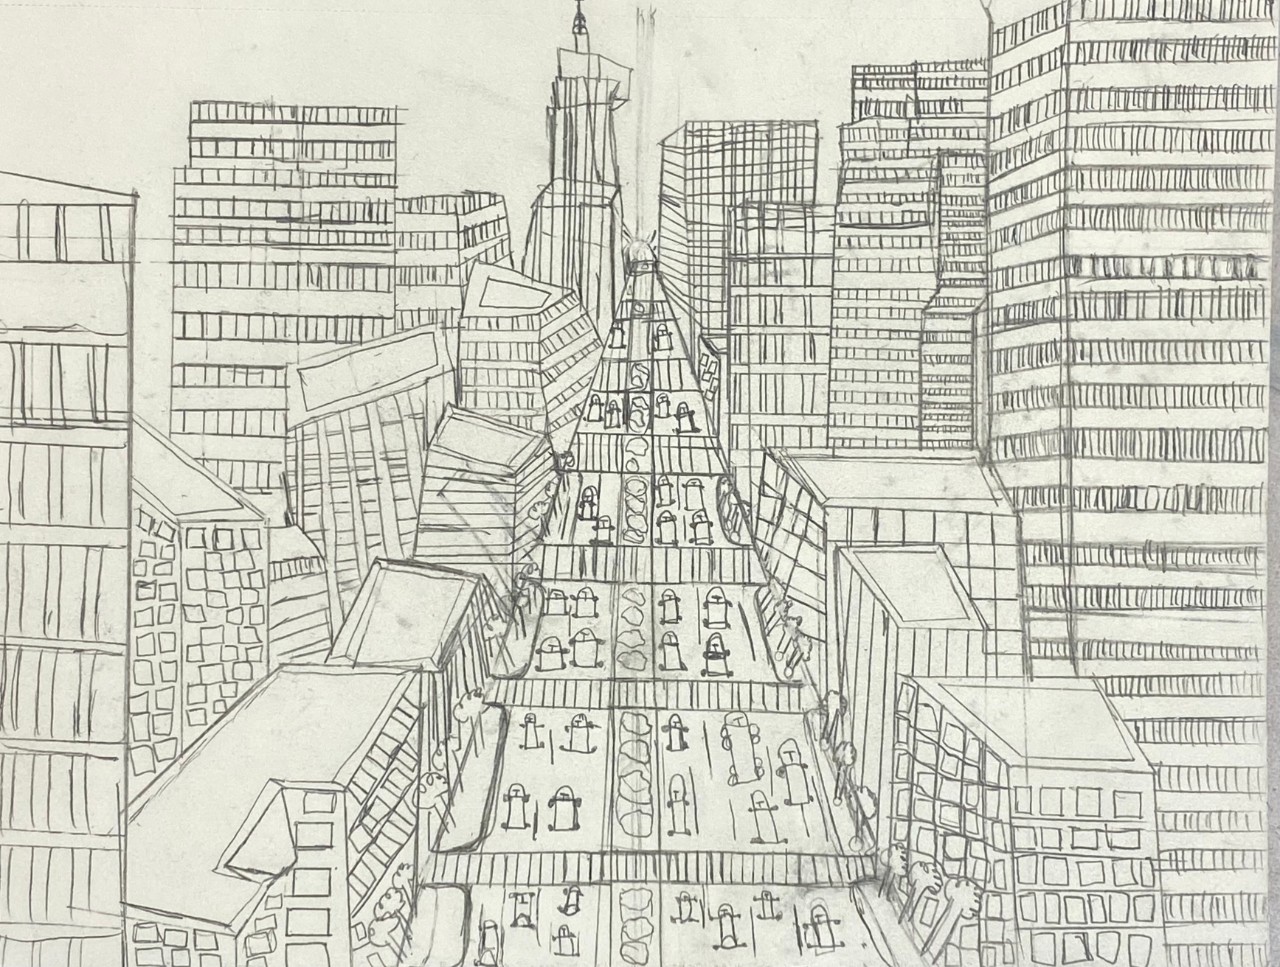 A line drawing shows a busy city street crowded with cars, viewed from high above. Tall buildings loom on either side and diminish toward the vanishing point.